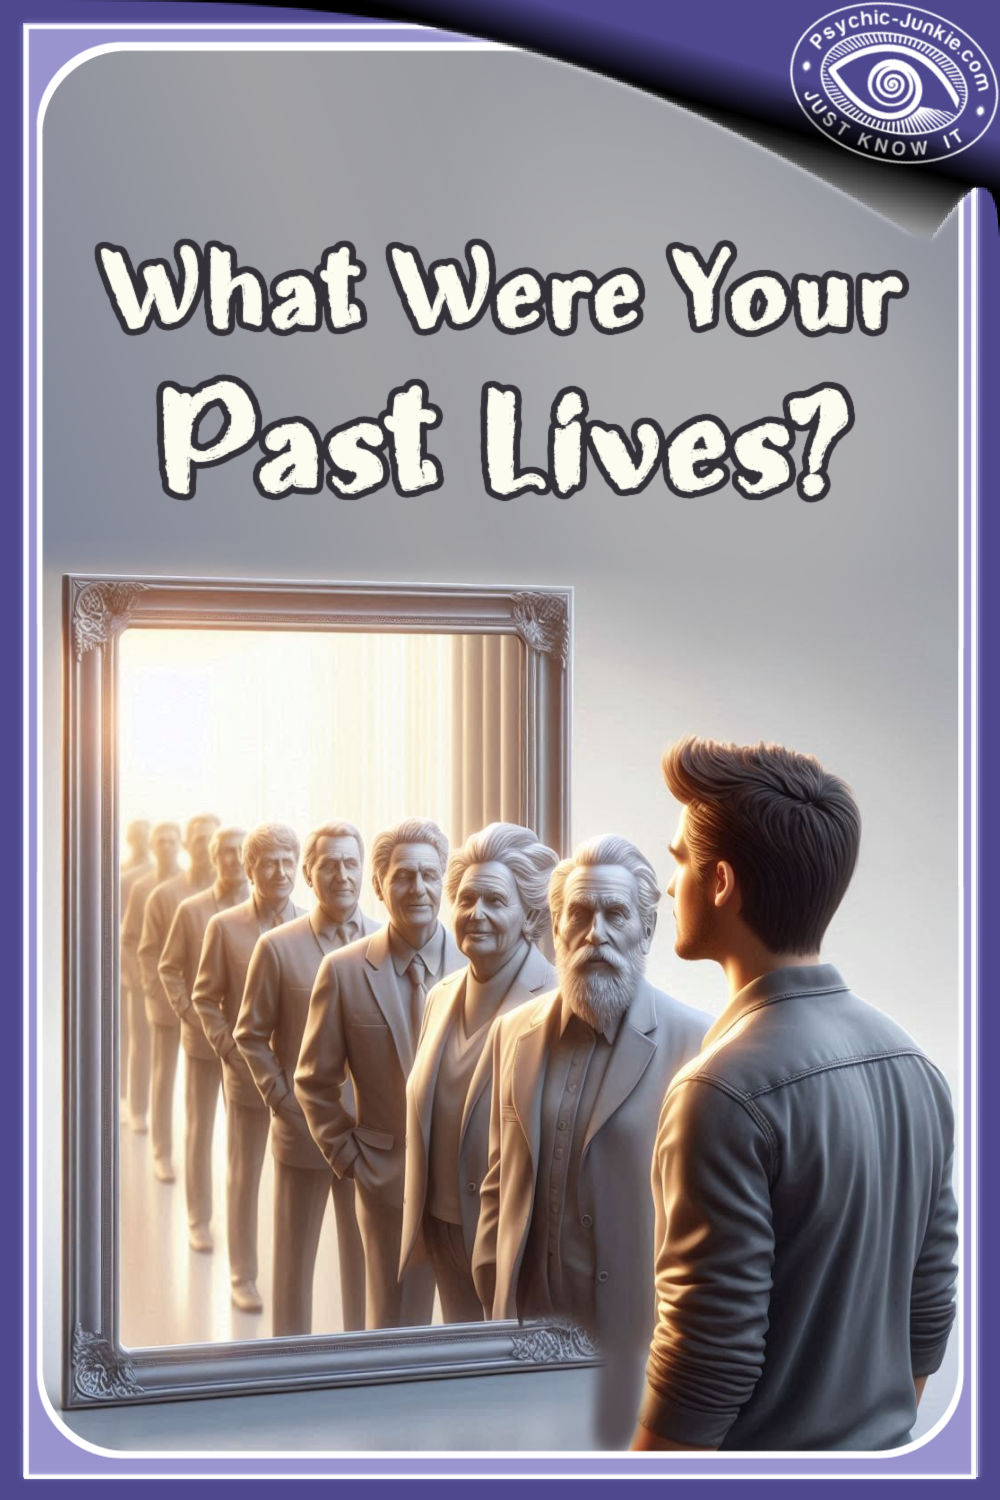 What Was Your Past Life?